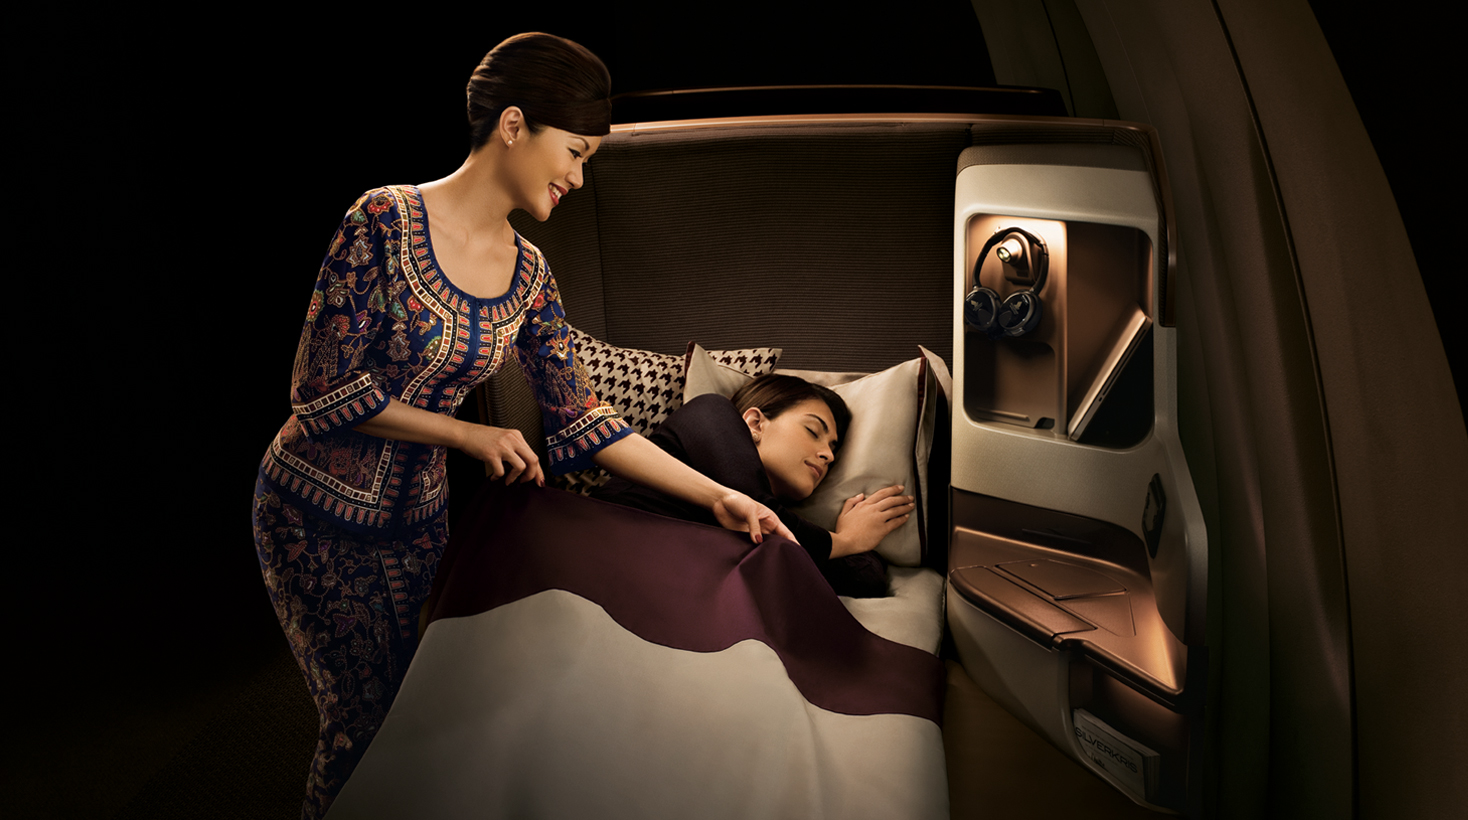 Singapore Airlines. SkyLuxTravel Blog. SkyLux - Discounted Business and First Class Flights